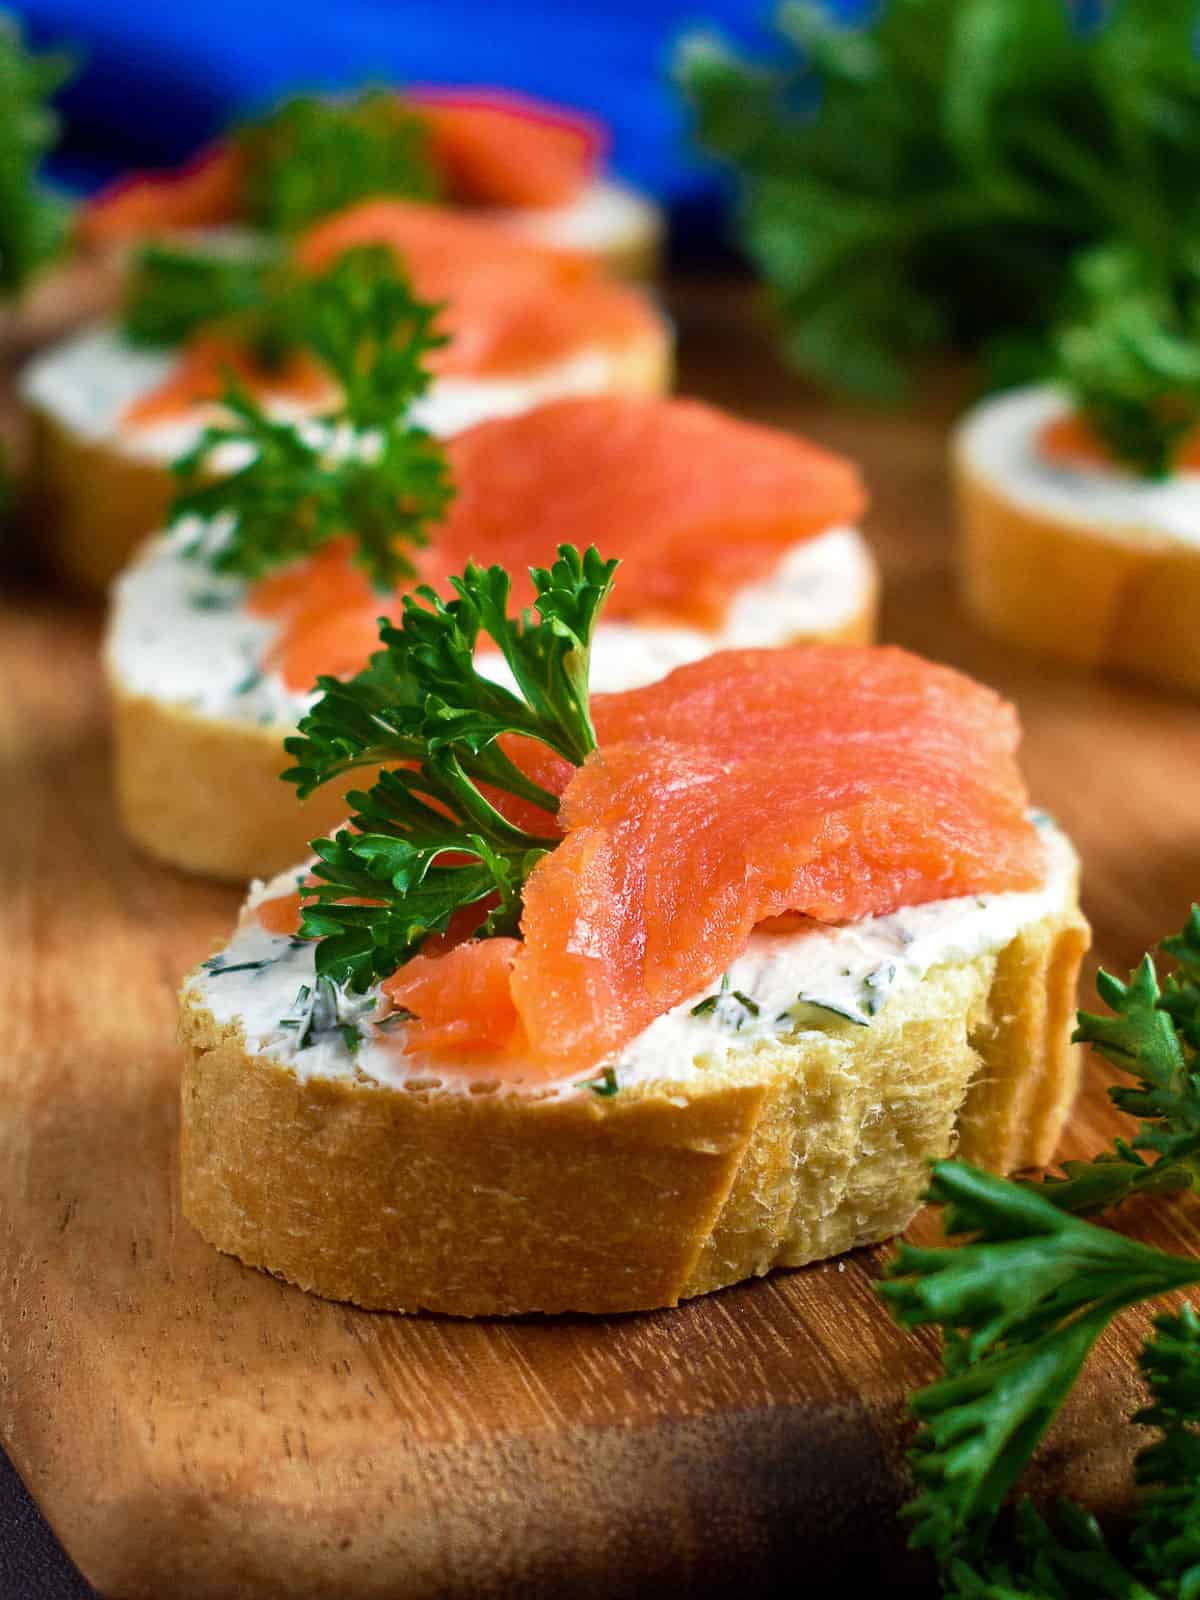 These easy Smoked Salmon Cream Cheese Tea Sandwiches are quick, elegant and an easy addition to a light lunch or an afternoon tea. | olgainthekitchen.com